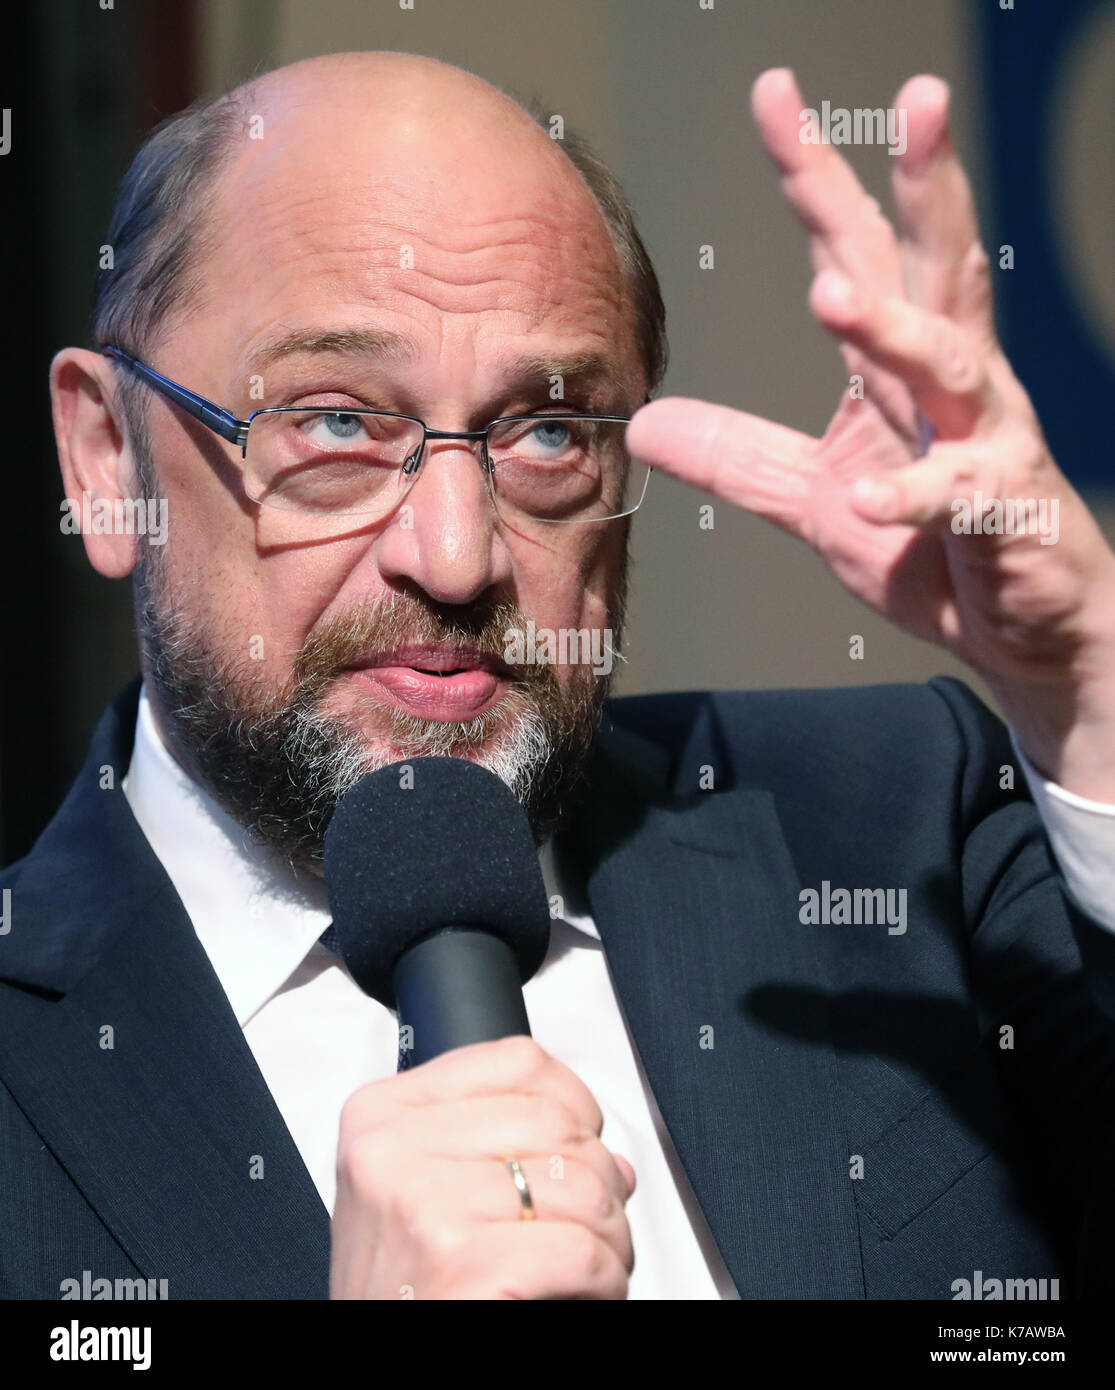 Rostock, Germany. 15th Sep, 2017. Martin Schulz, candidate for chancellorship from the Social Democratic Party of Germany (SPD), speaking at an event of the 'Ostsee-Zeitung' (lit. Baltic Sea newspaper) in Rostock, Germany, 15 September 2017. He has been on a campaign trail with minister president Manuela Schwesig. Photo: Bernd Wüstneck/dpa/Alamy Live News Stock Photo